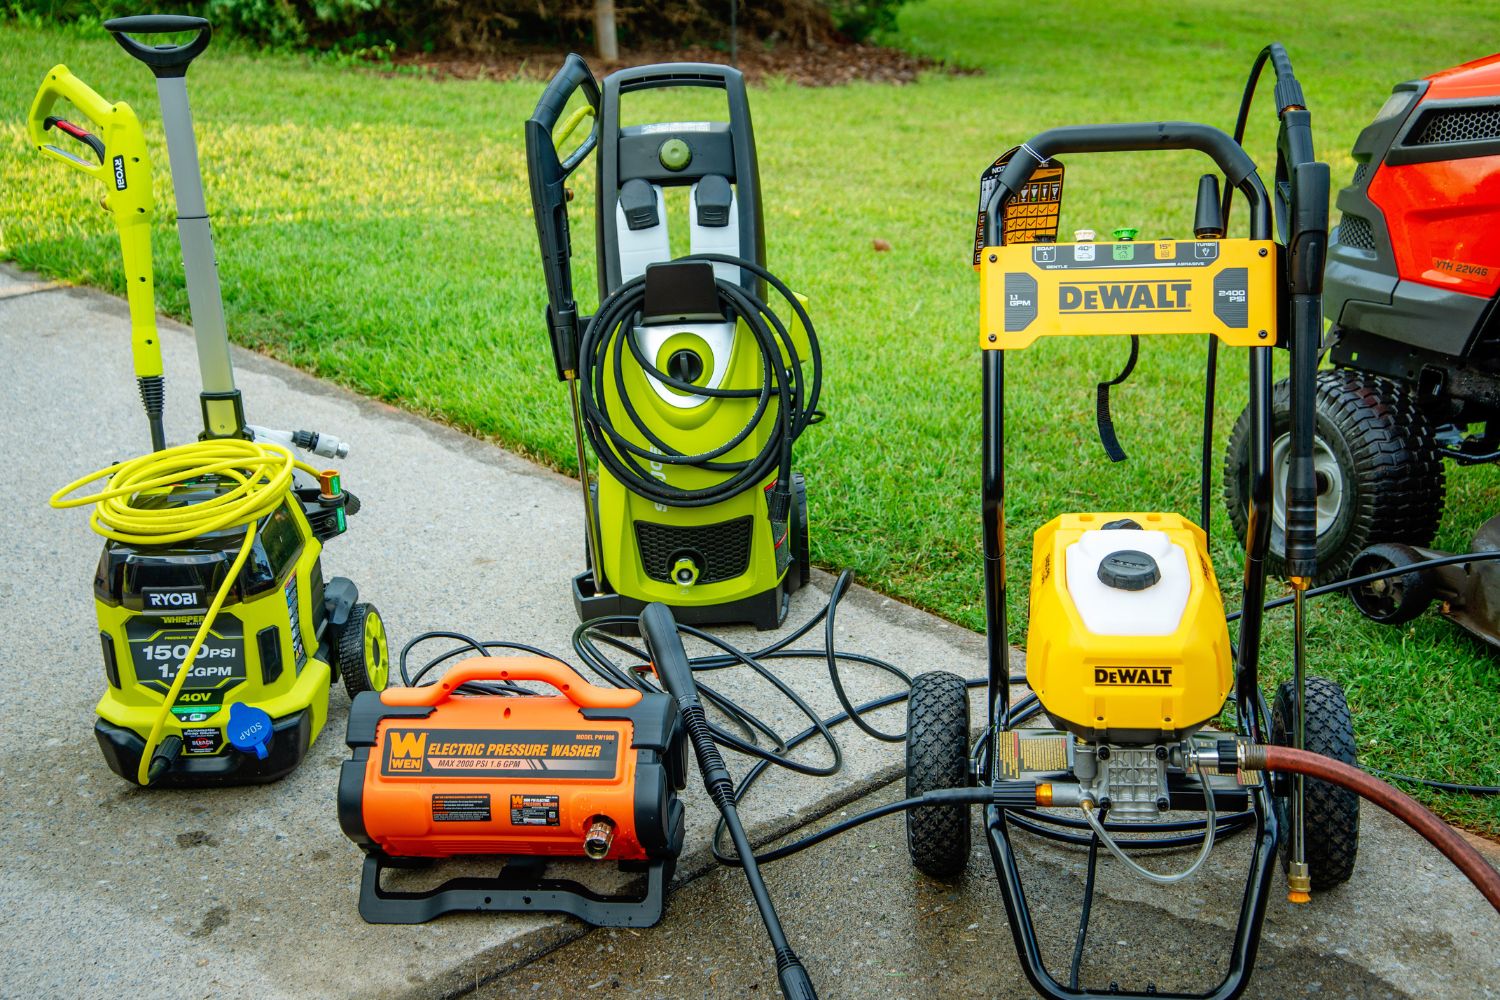 The Best Hose End Sprayers, Tested and Reviewed - Bob Vila